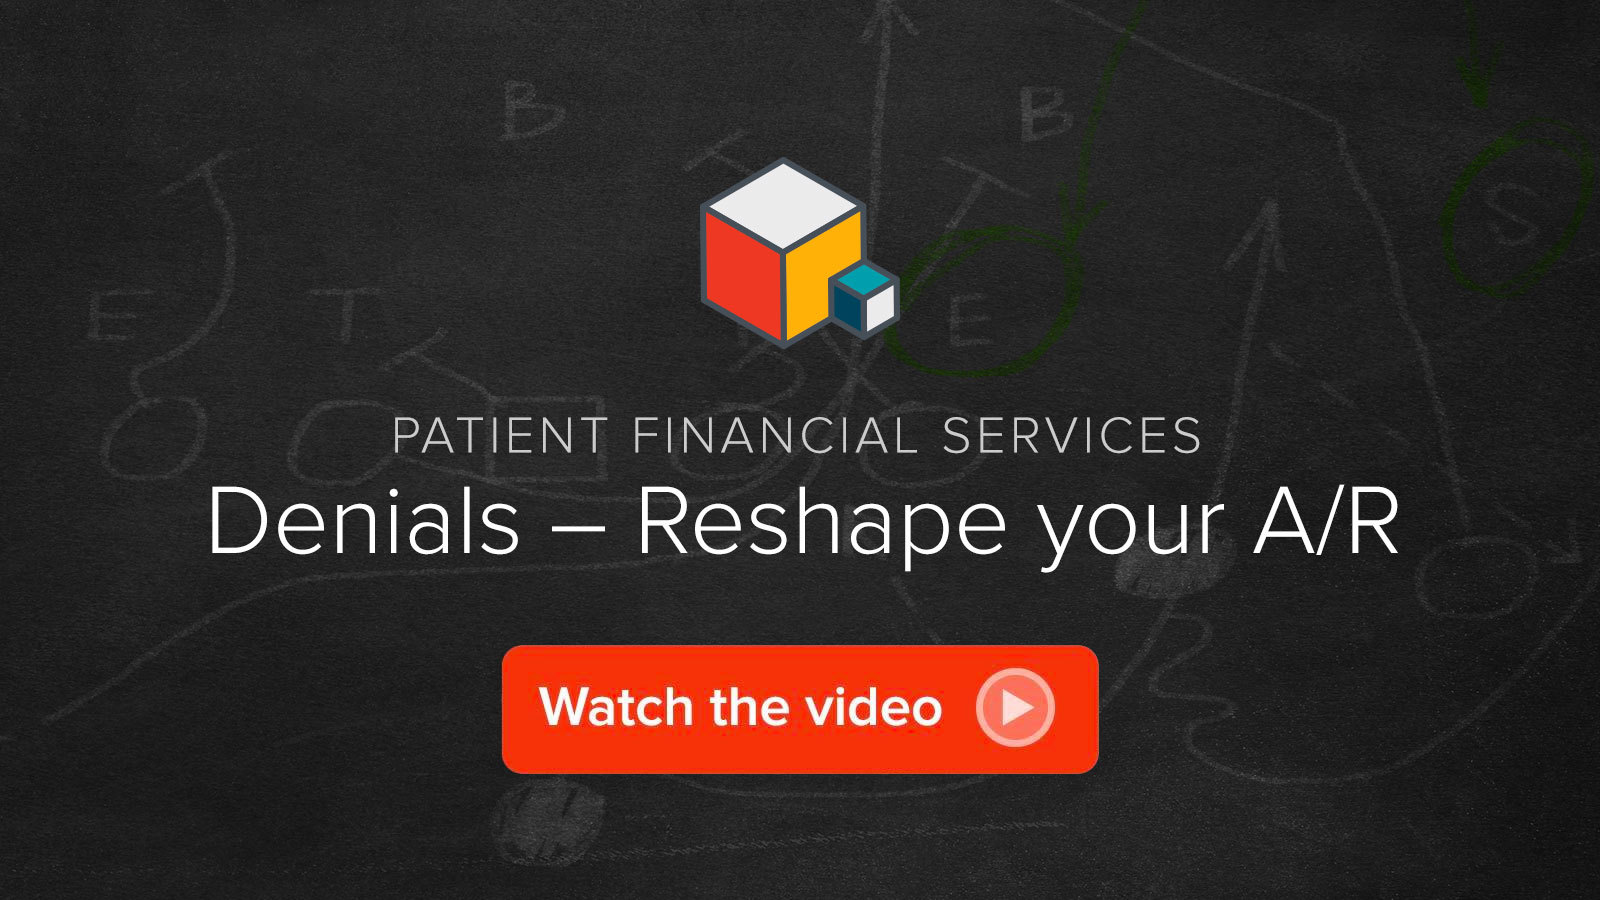 Watch the Denials – Reshape your A/R in 3 Simple Areas video